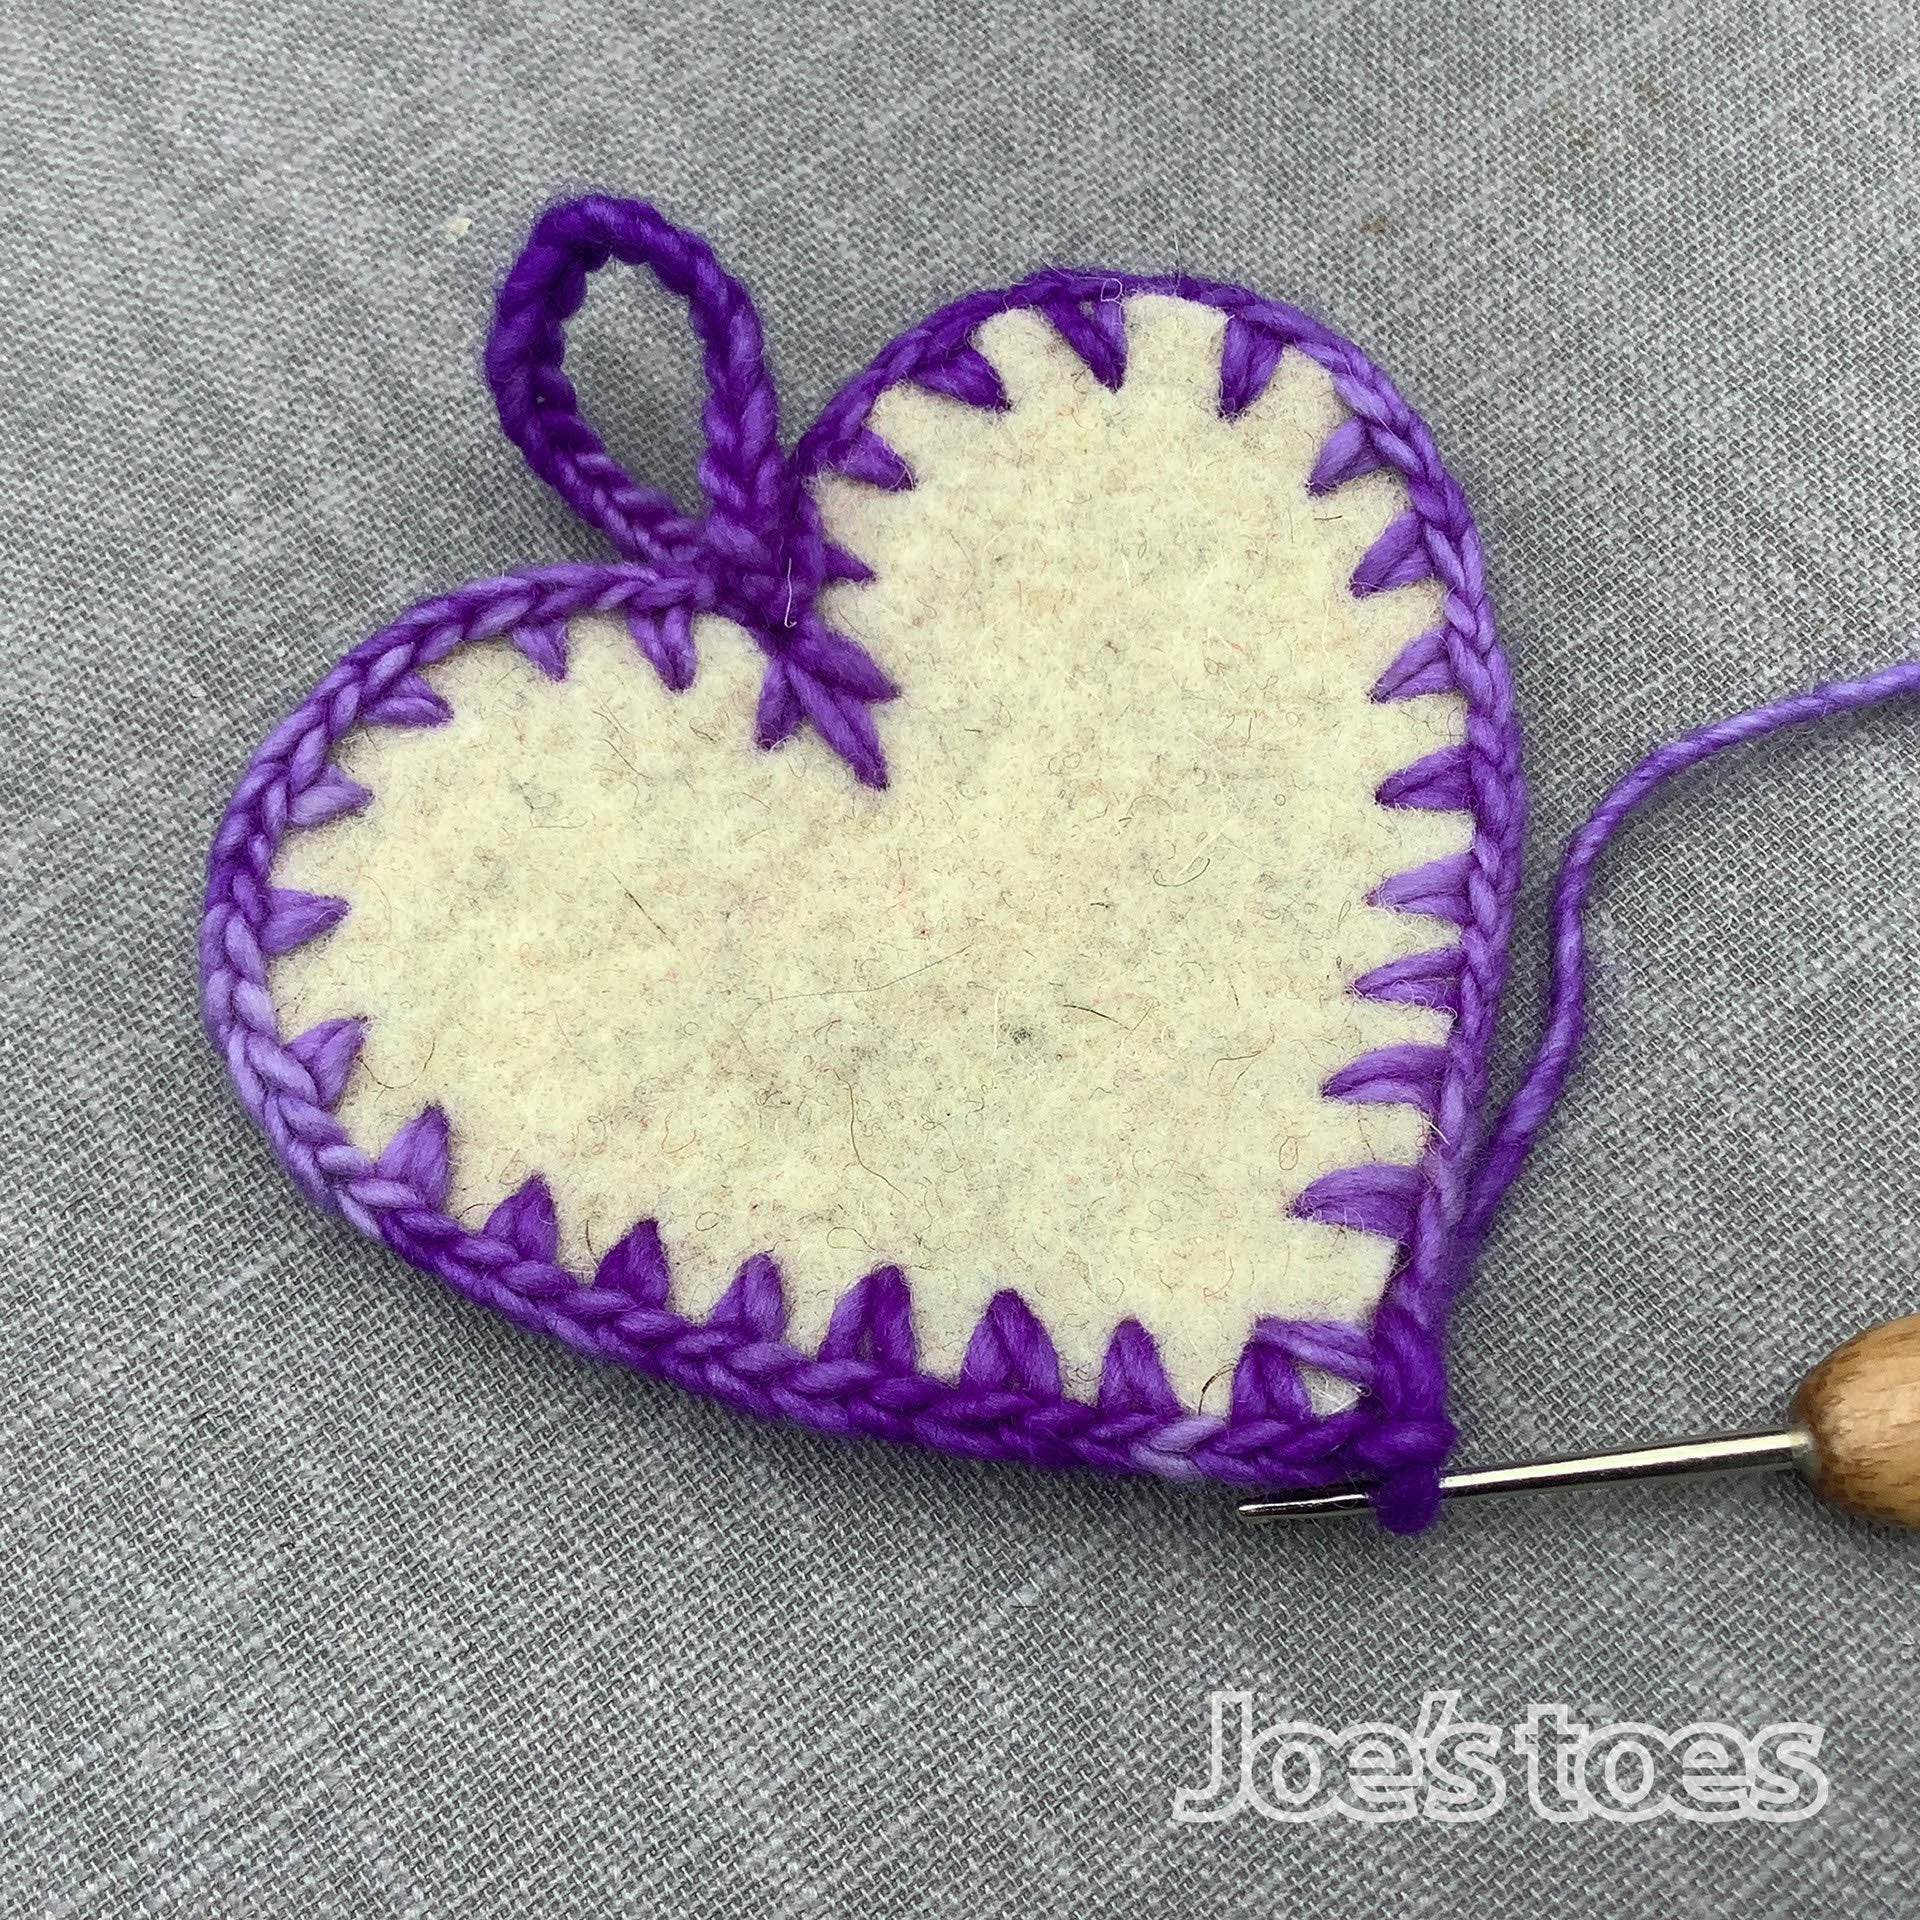 Heart Shaped Sew On Patches  Elbow or Knee Patches – Joe's Toes US